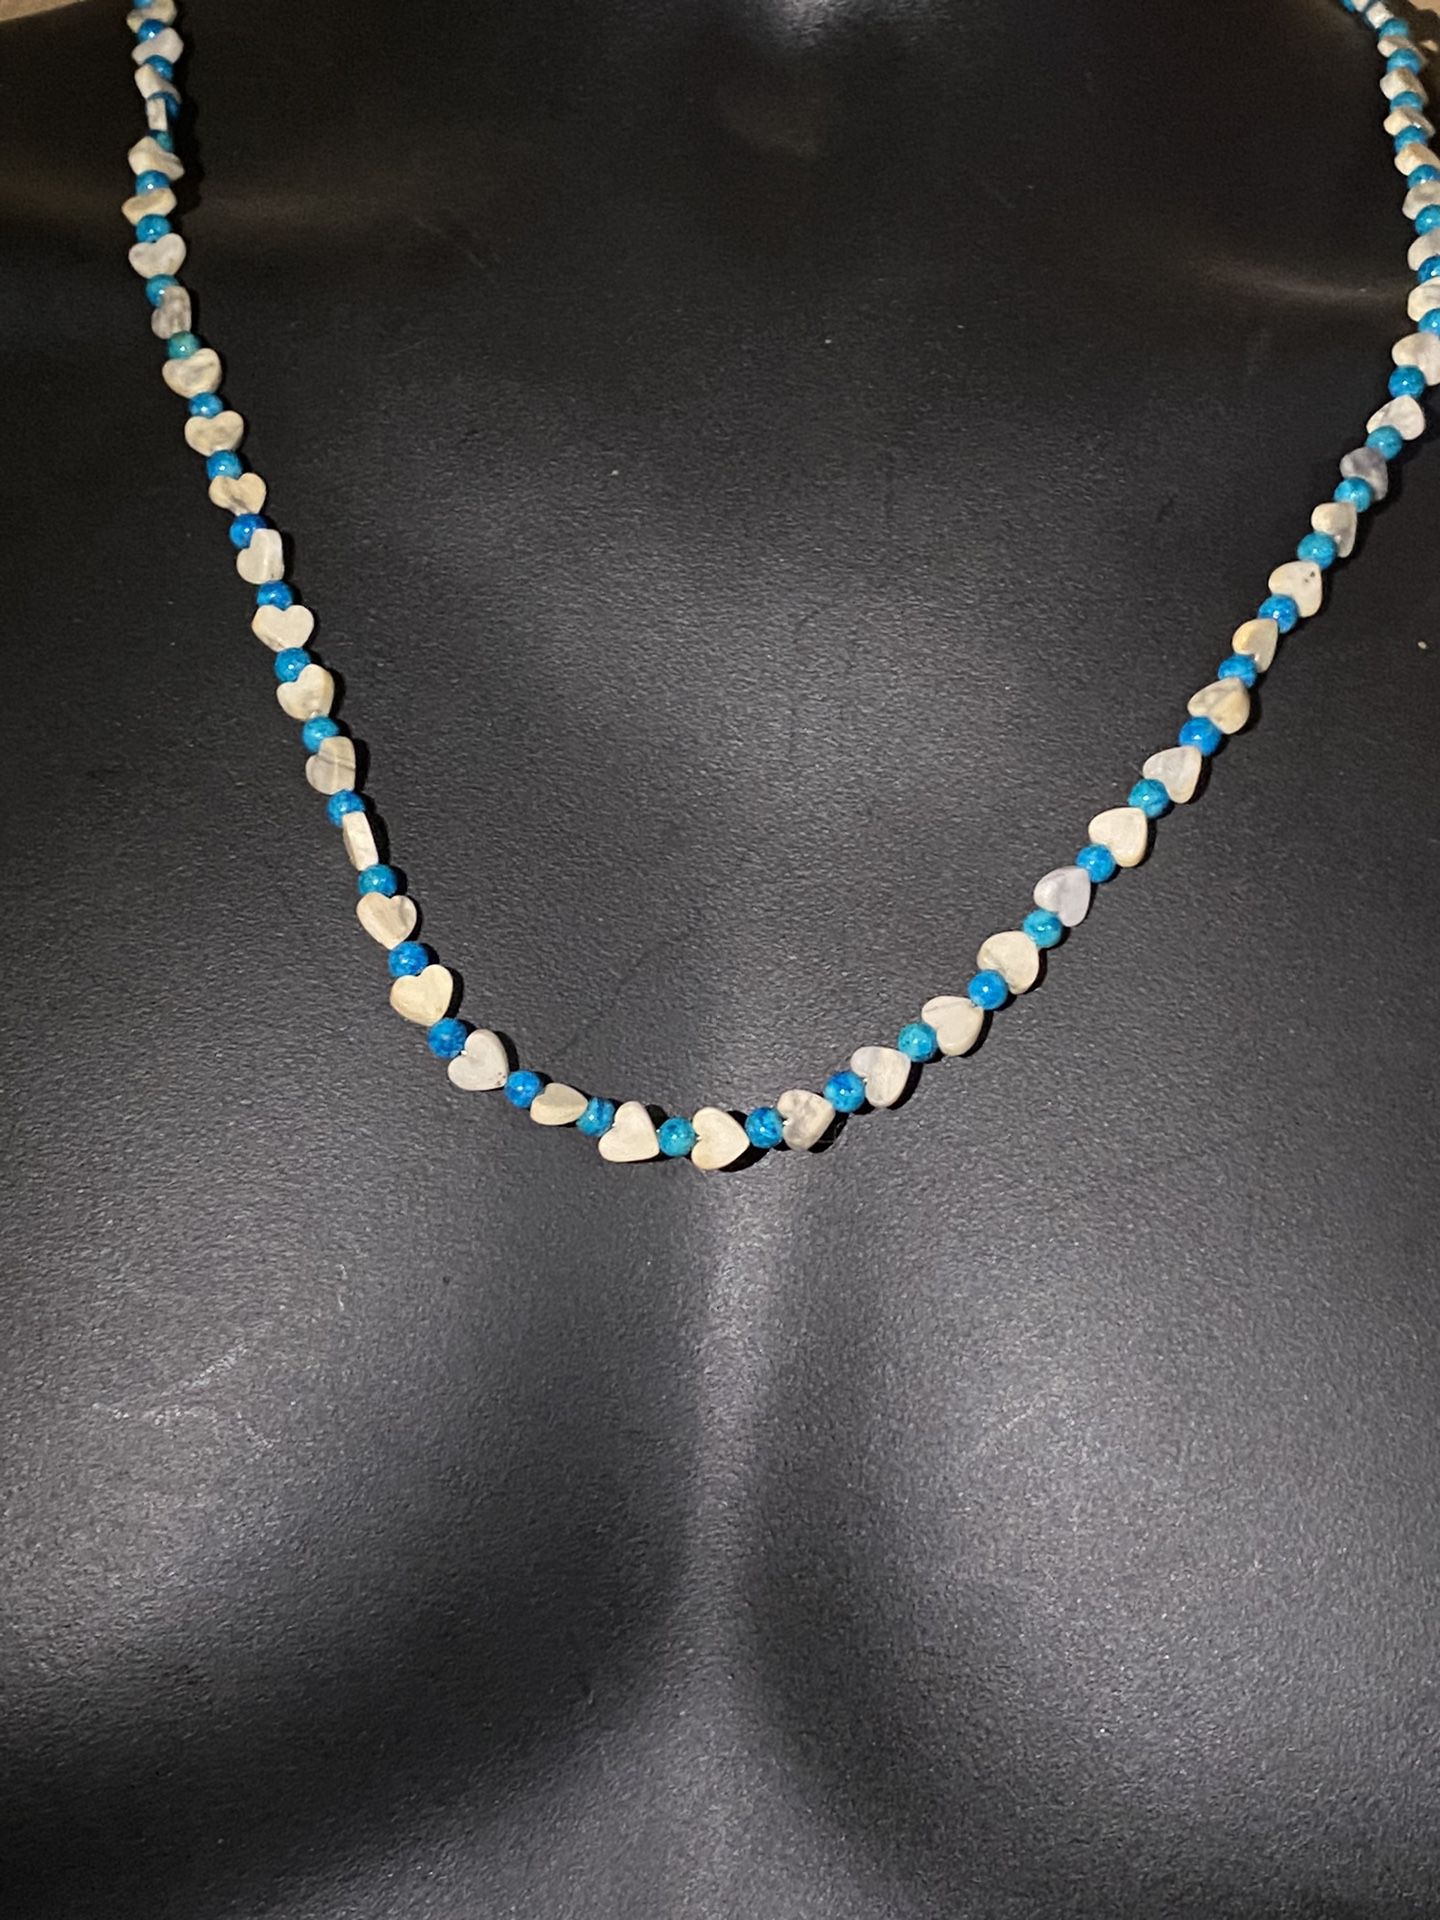 Natural Vintage Blue Turquoise Round beads Beaded Necklace. 22” long